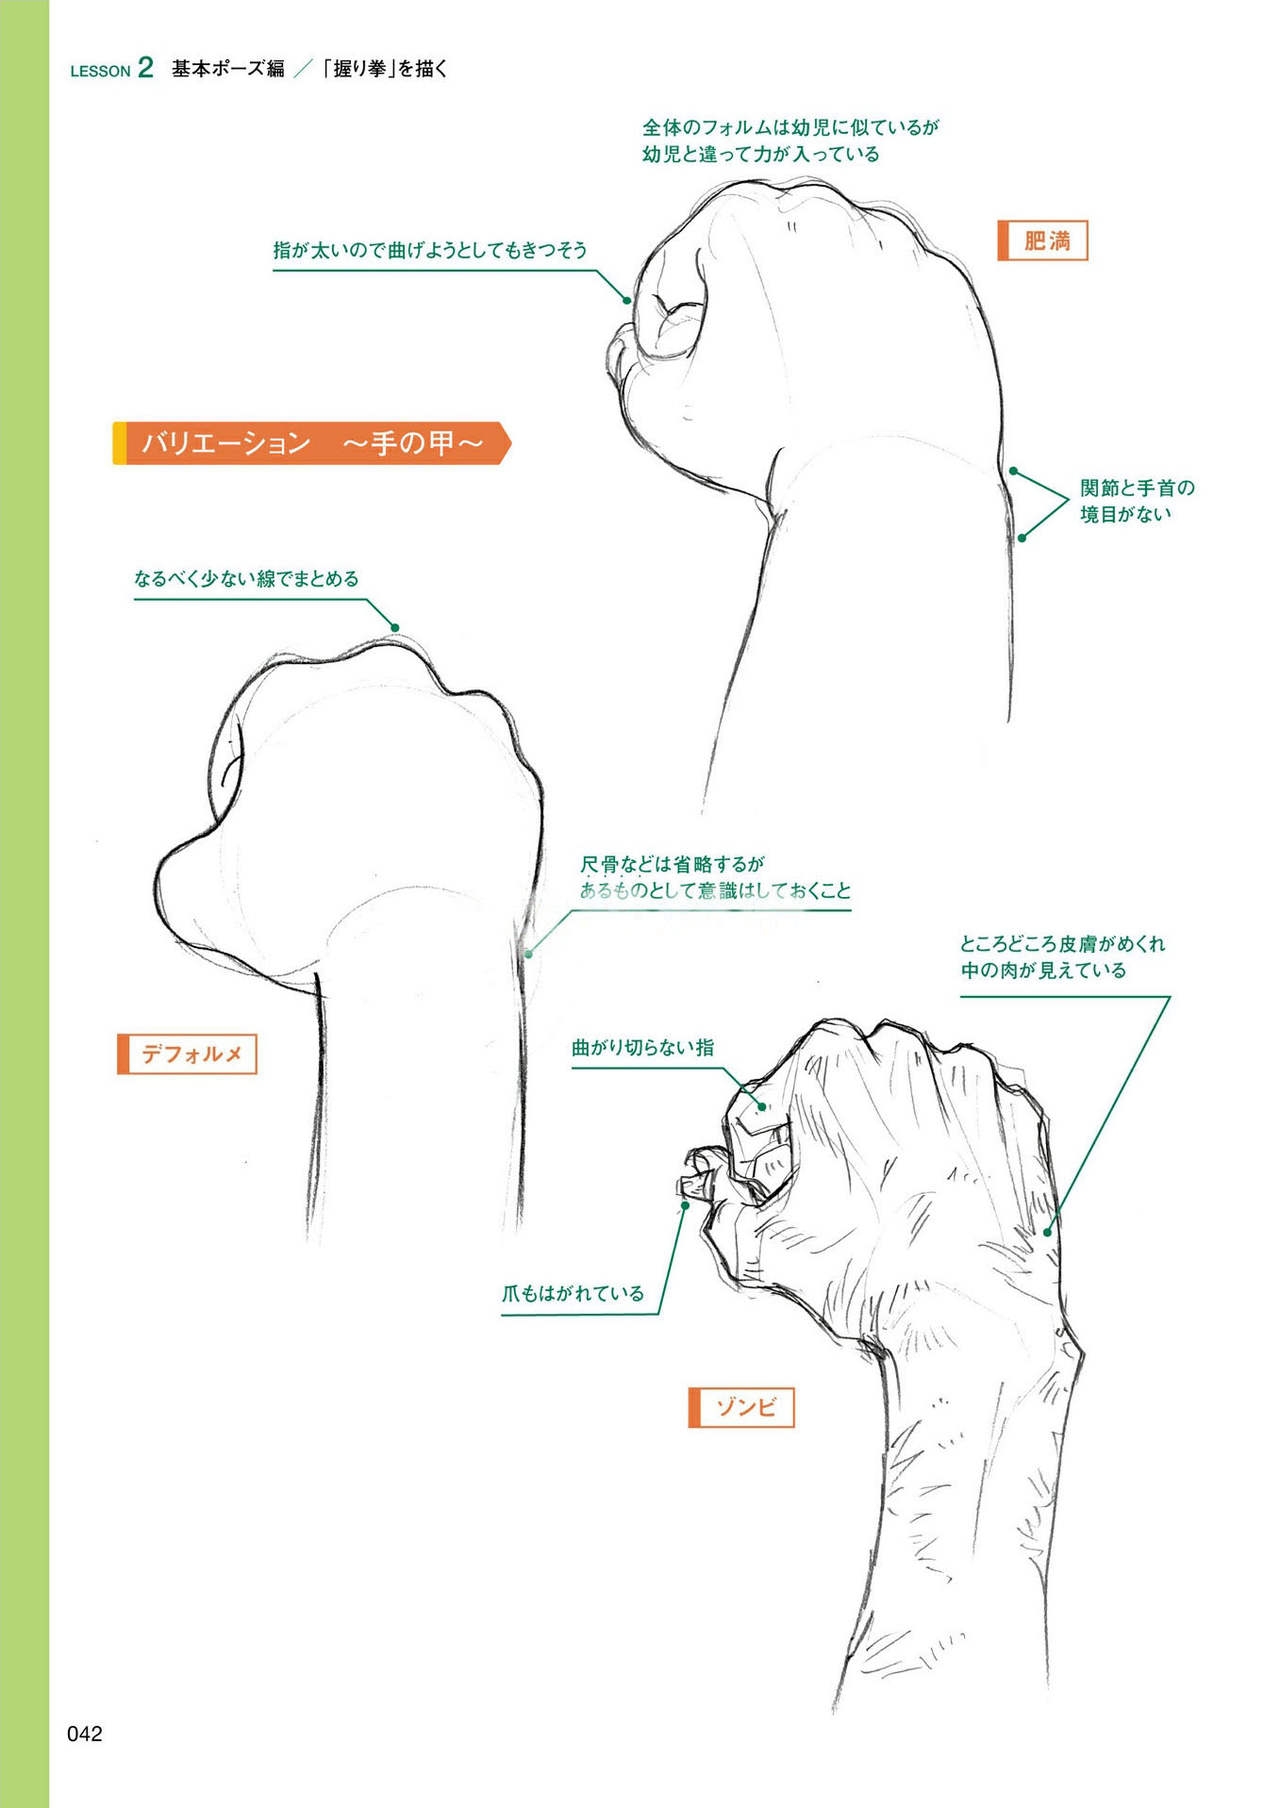 How to draw hands 42